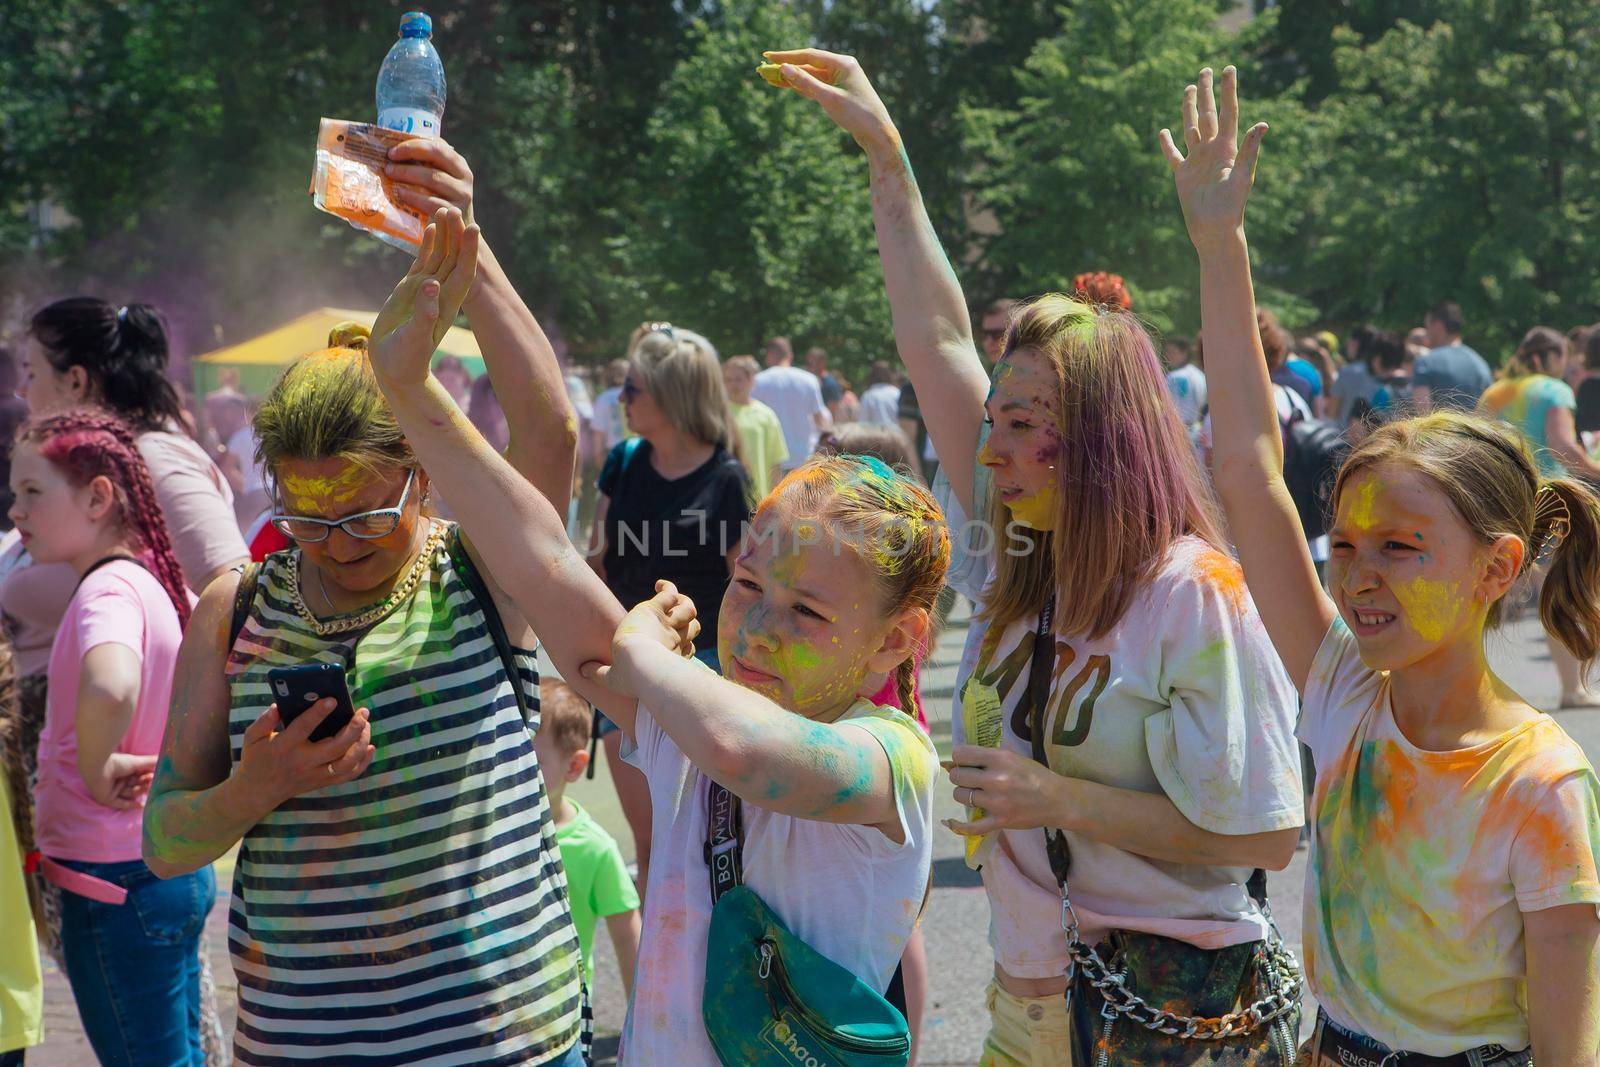 Novokuznetsk, Kemerovo region, Russia - June 12, 2022 :: Children with colorful faces painted with holi powder having fun outdoors.